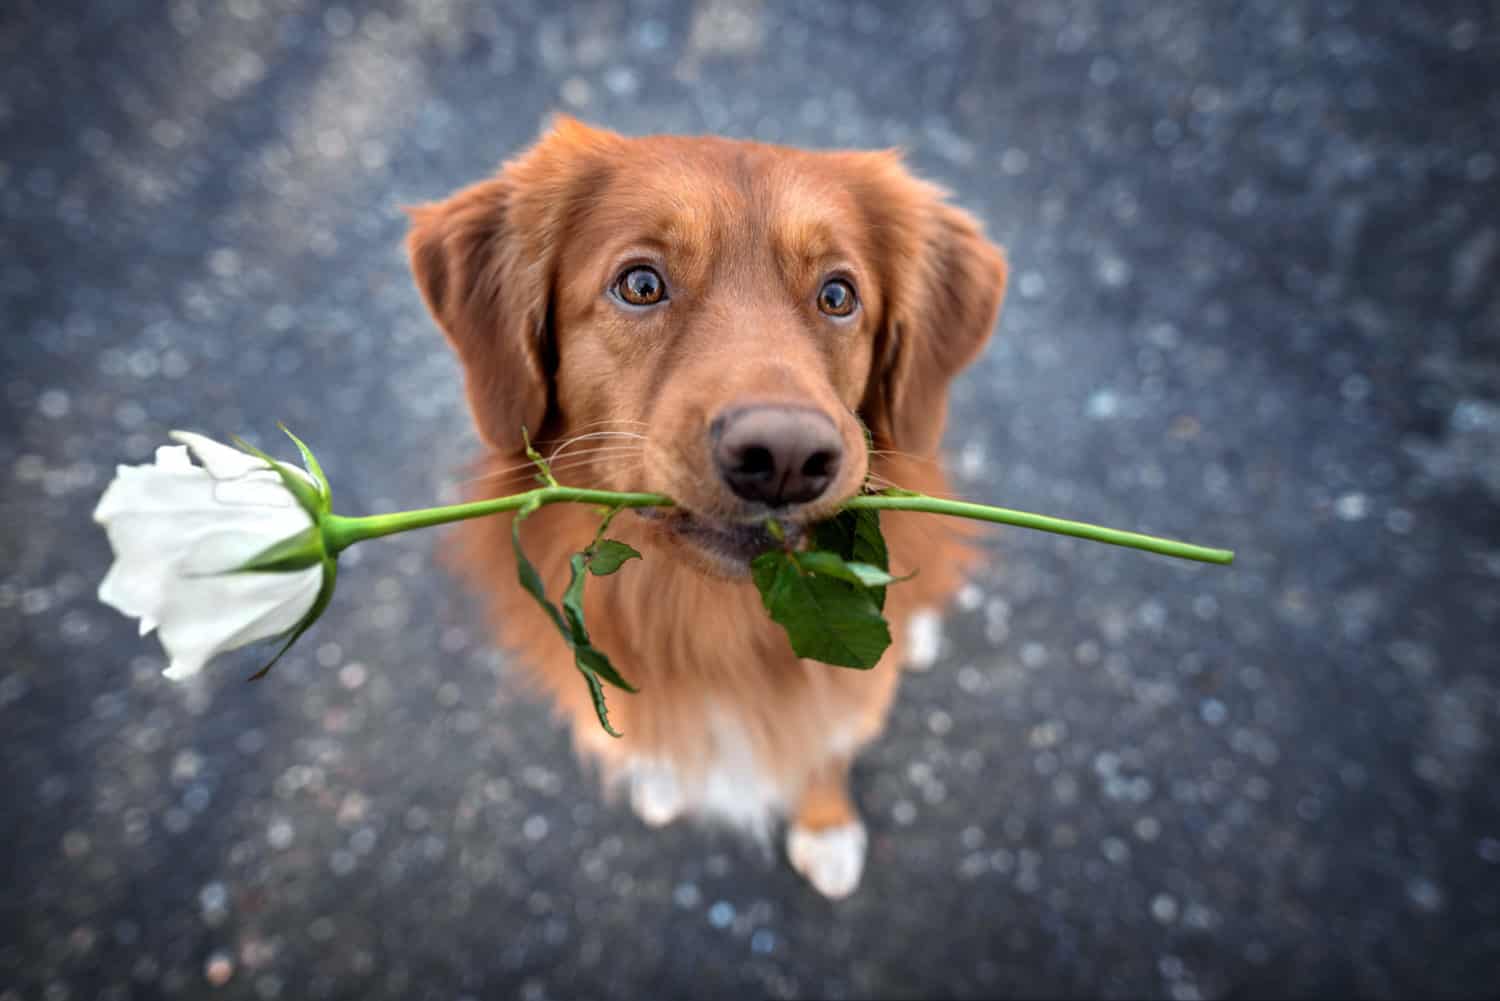 Dog and flower